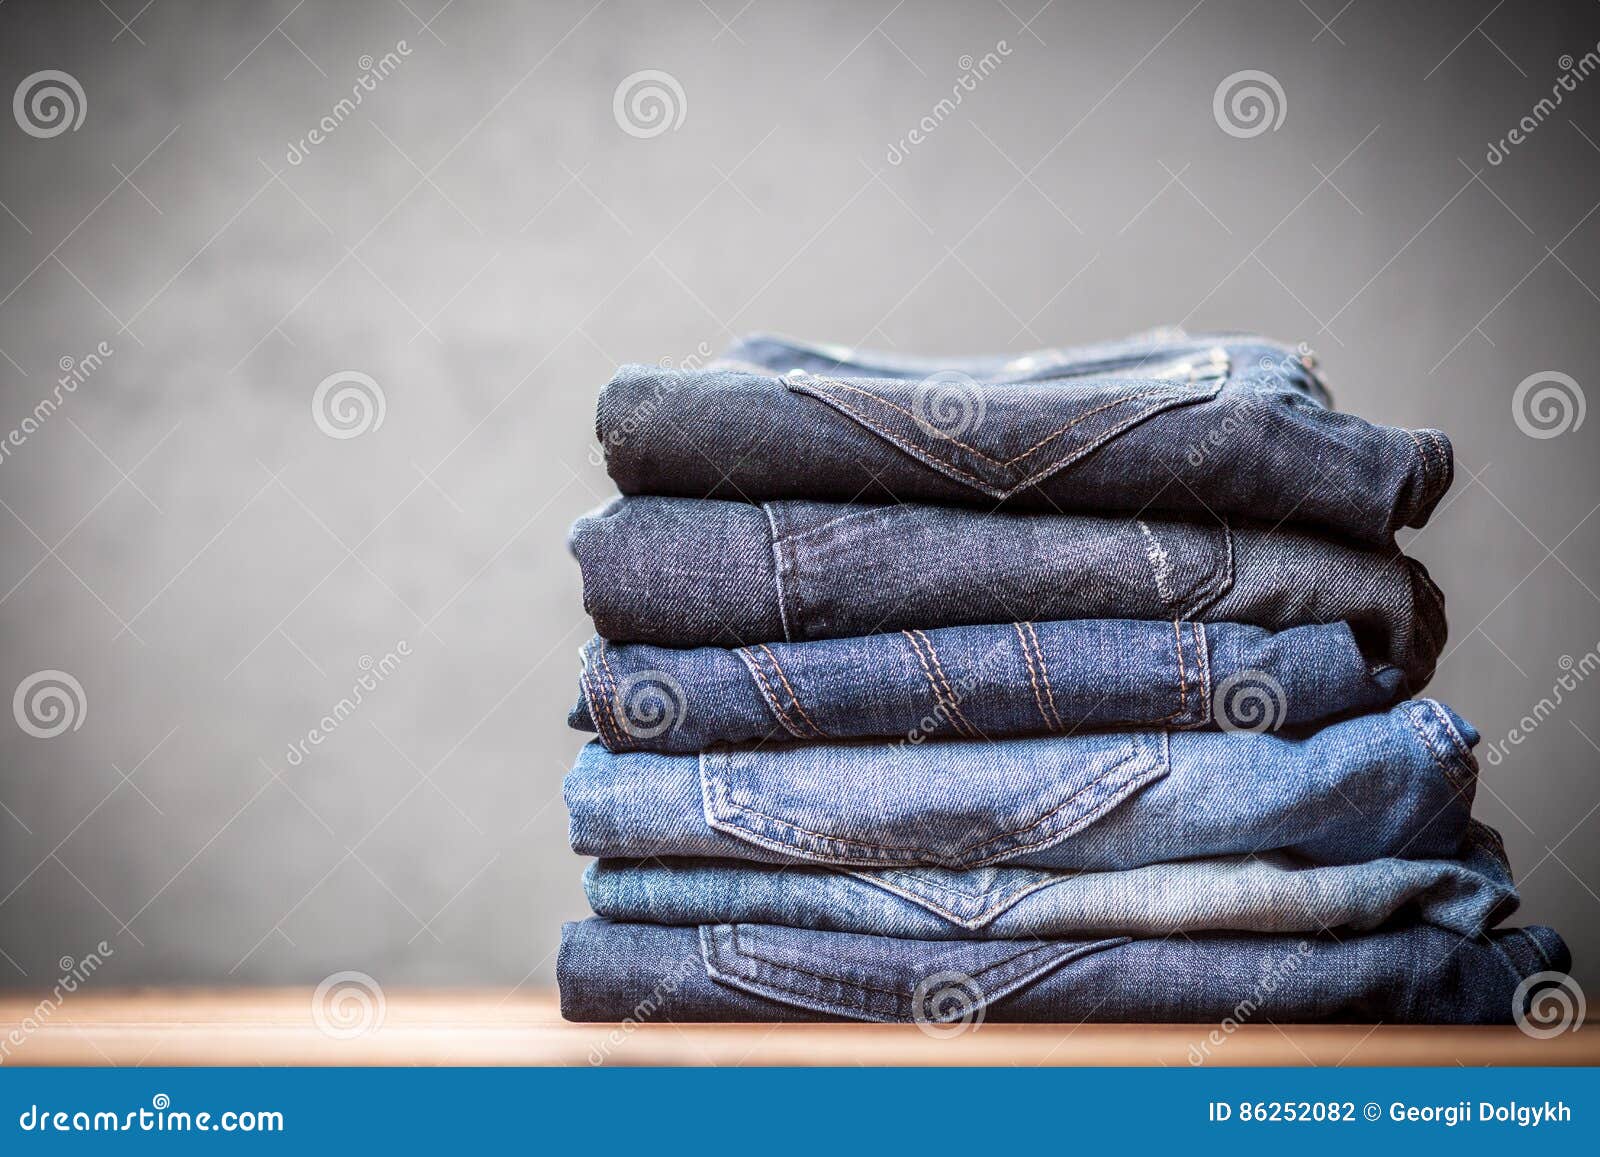 Pile of jeans stock photo. Image of garment, jeans, background - 86252082